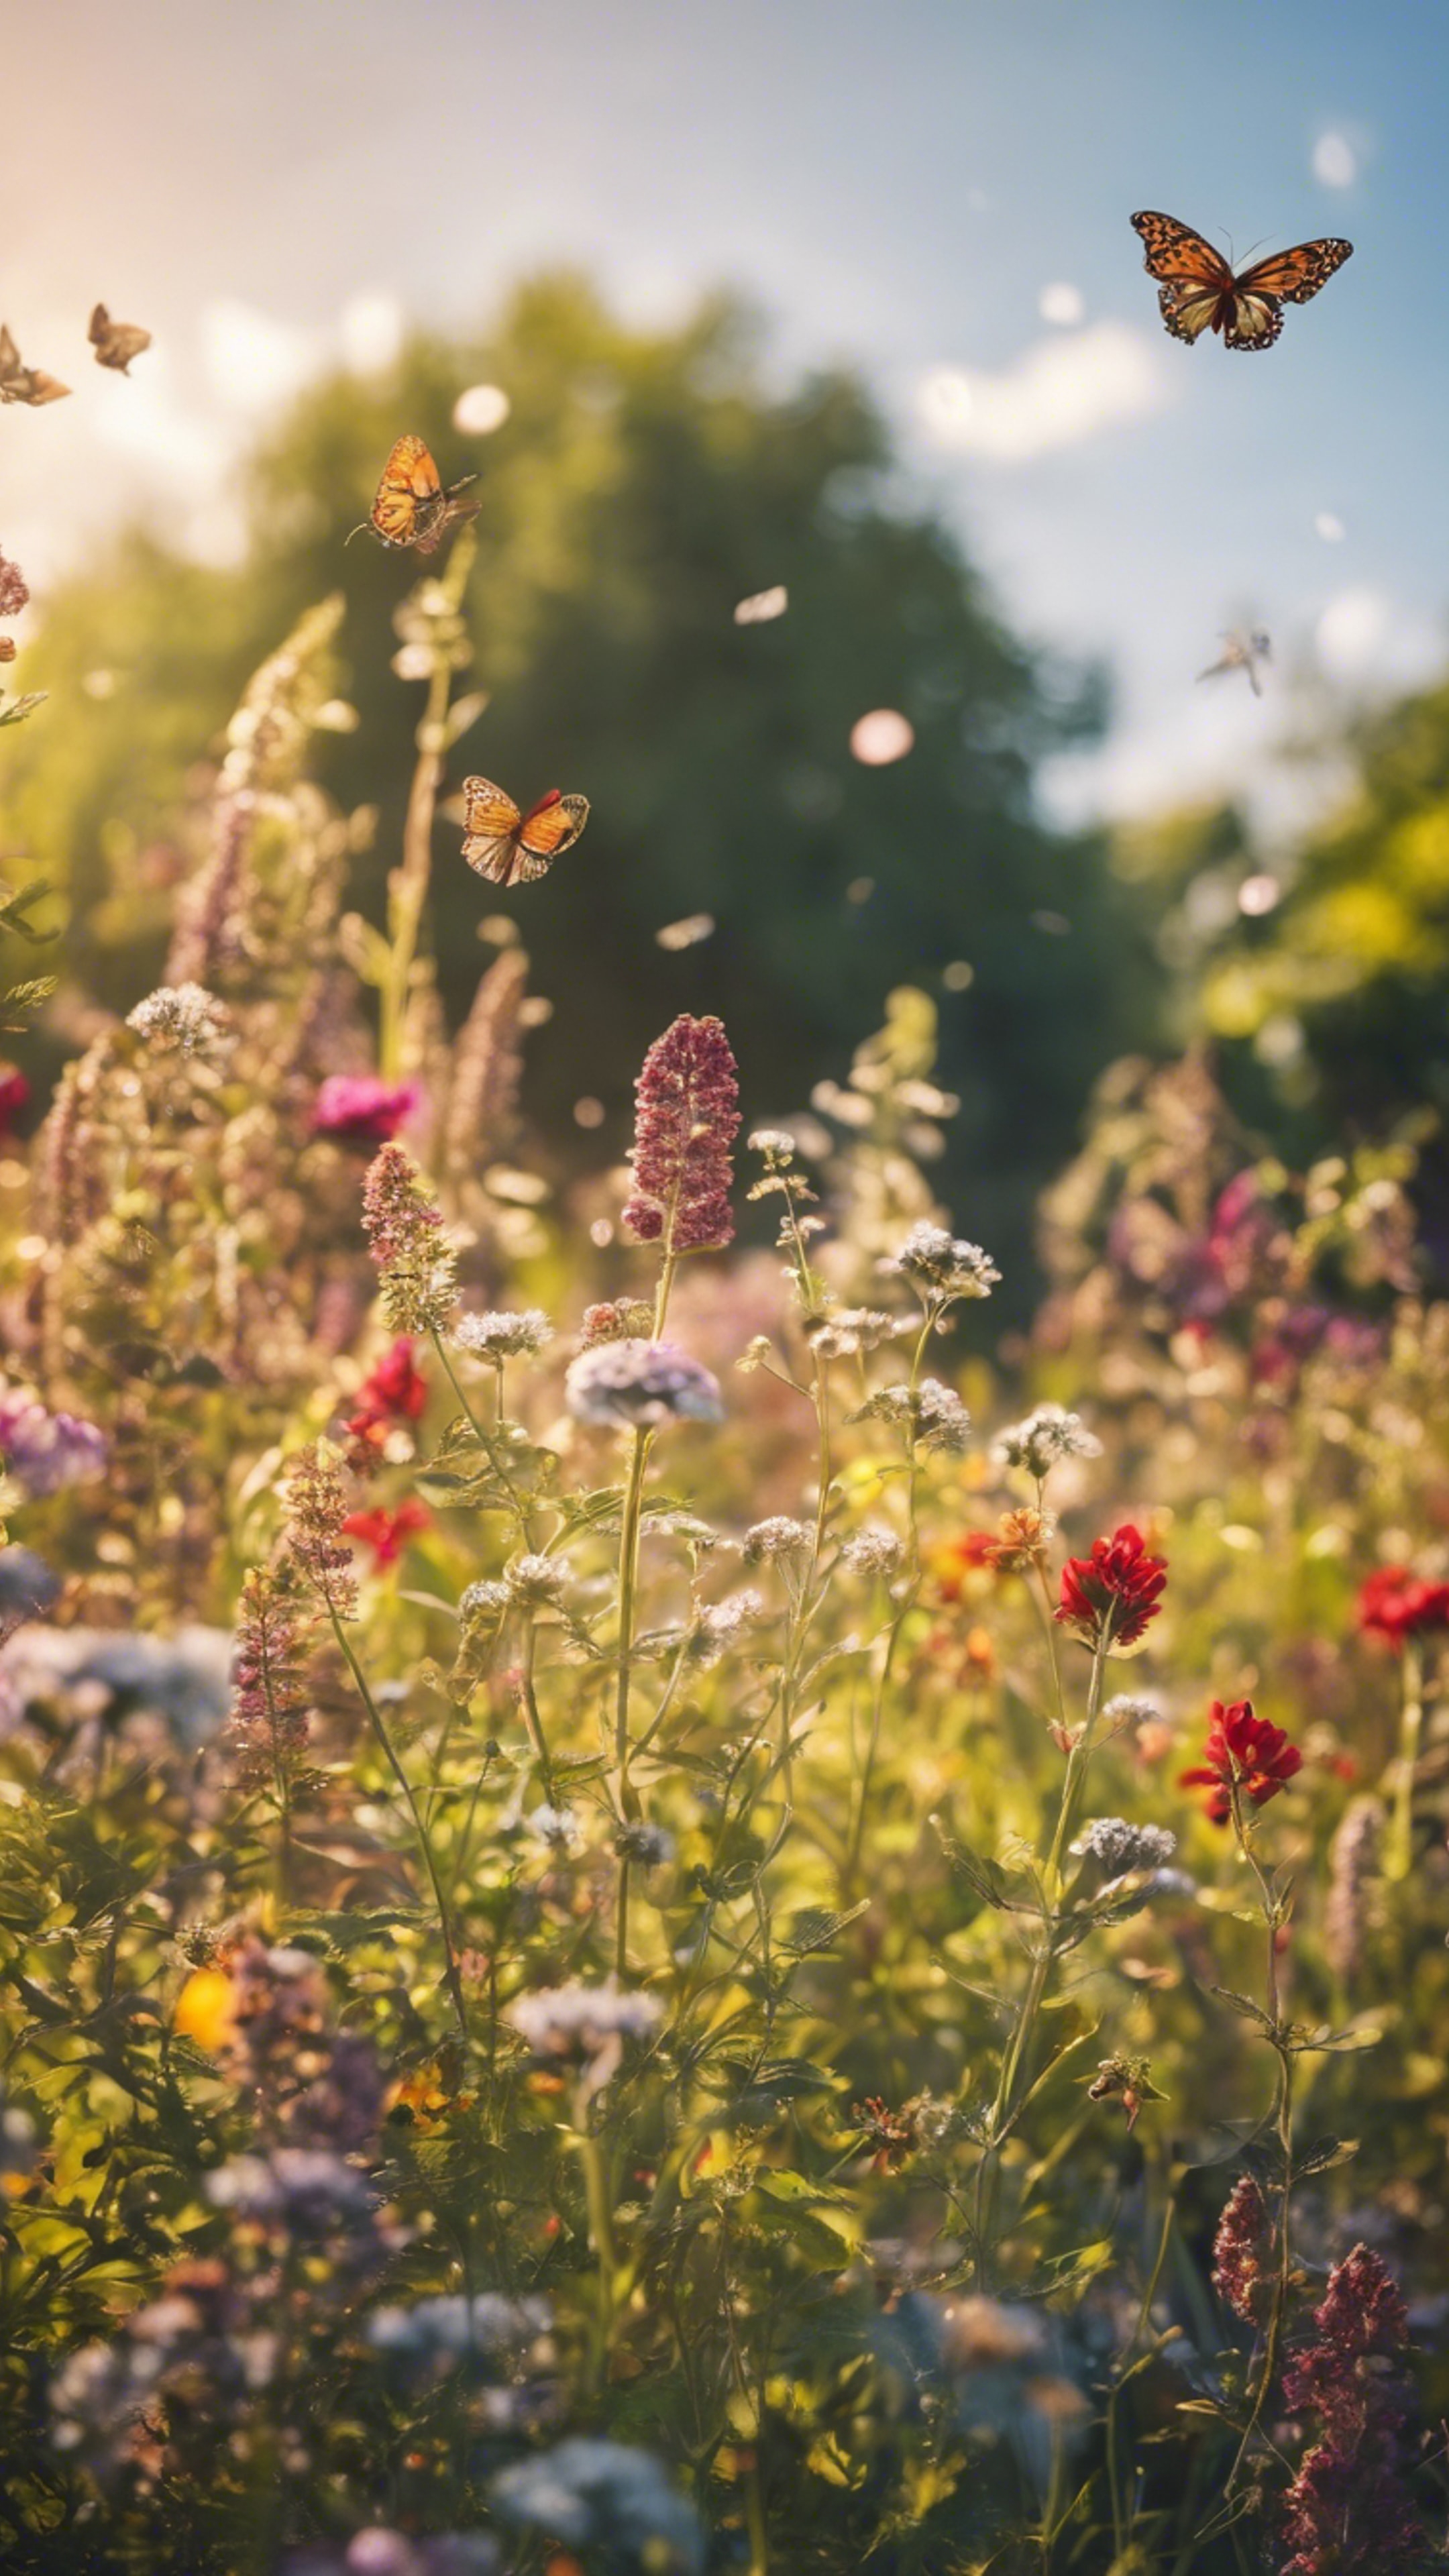 A colorful scene of a French country garden bursting with wildflowers and butterflies under a warm afternoon sun. วอลล์เปเปอร์[d1166188c03b4b319ebf]